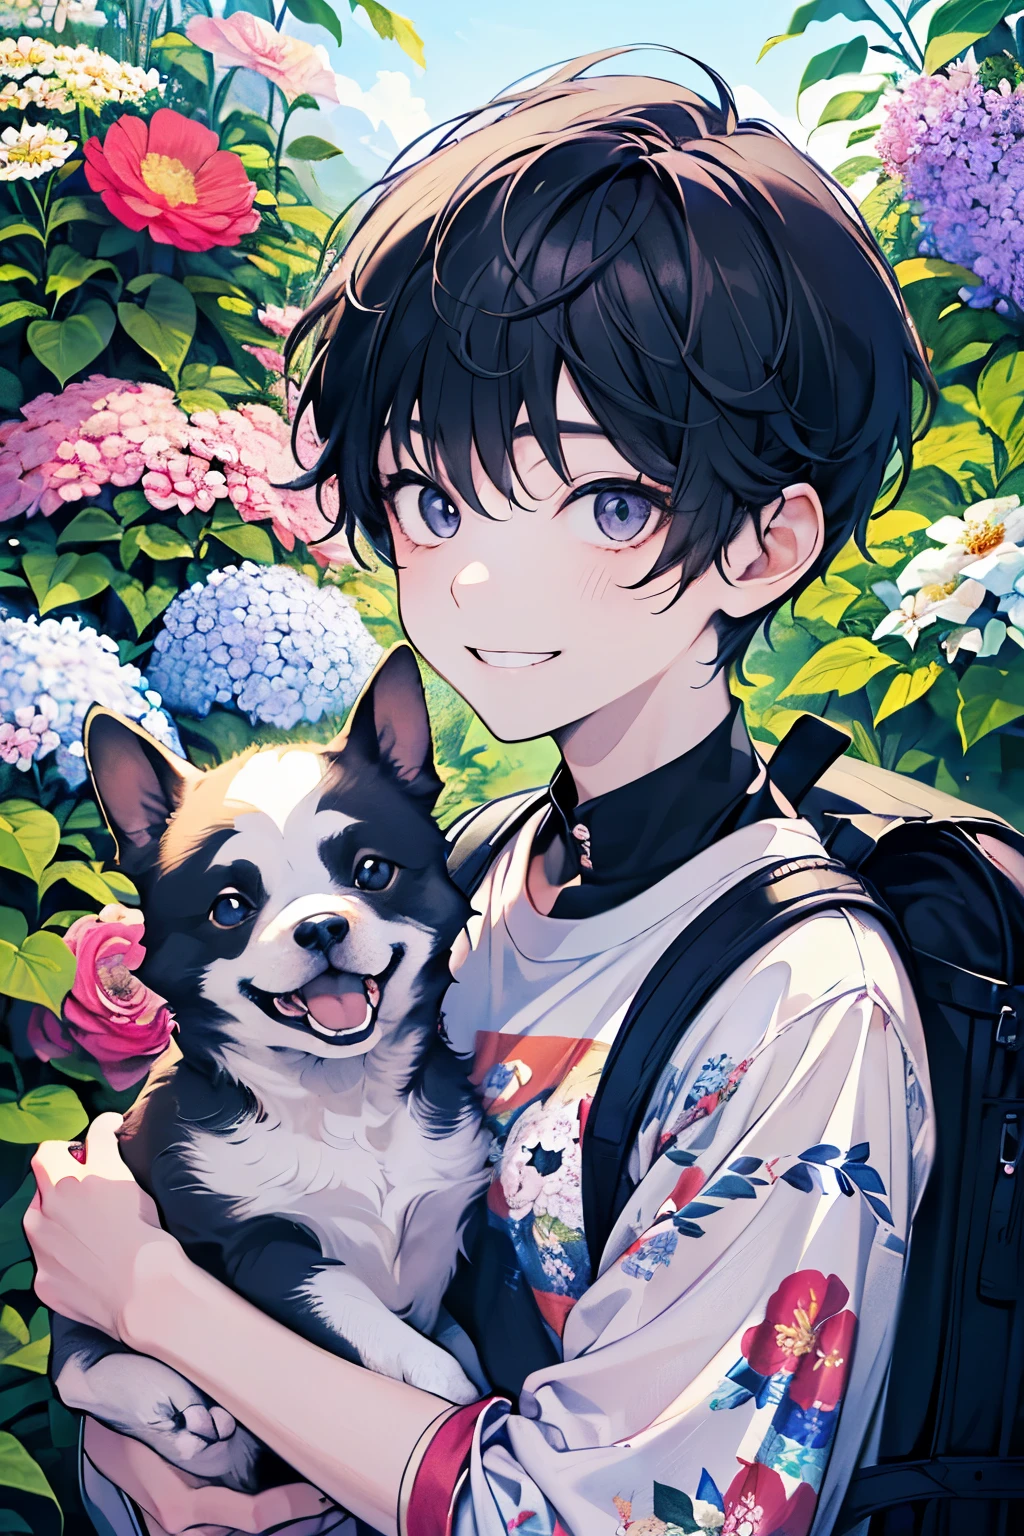 ((kids:1.1)),((A boy about 5 years old:1.2)),((Shota:1.2)),(Oversized floral T-shirt:1.35),Prompt: An incredibly charming  carrying a backpack, accompanied by her adorable puppy, enjoying a lovely spring outing surrounded by beautiful  flowers and natural scenery. The illustration is in high definition at 4k resolution, with highly-detailed facial features and cartoon-style visuals,((A big smile:1.25)).